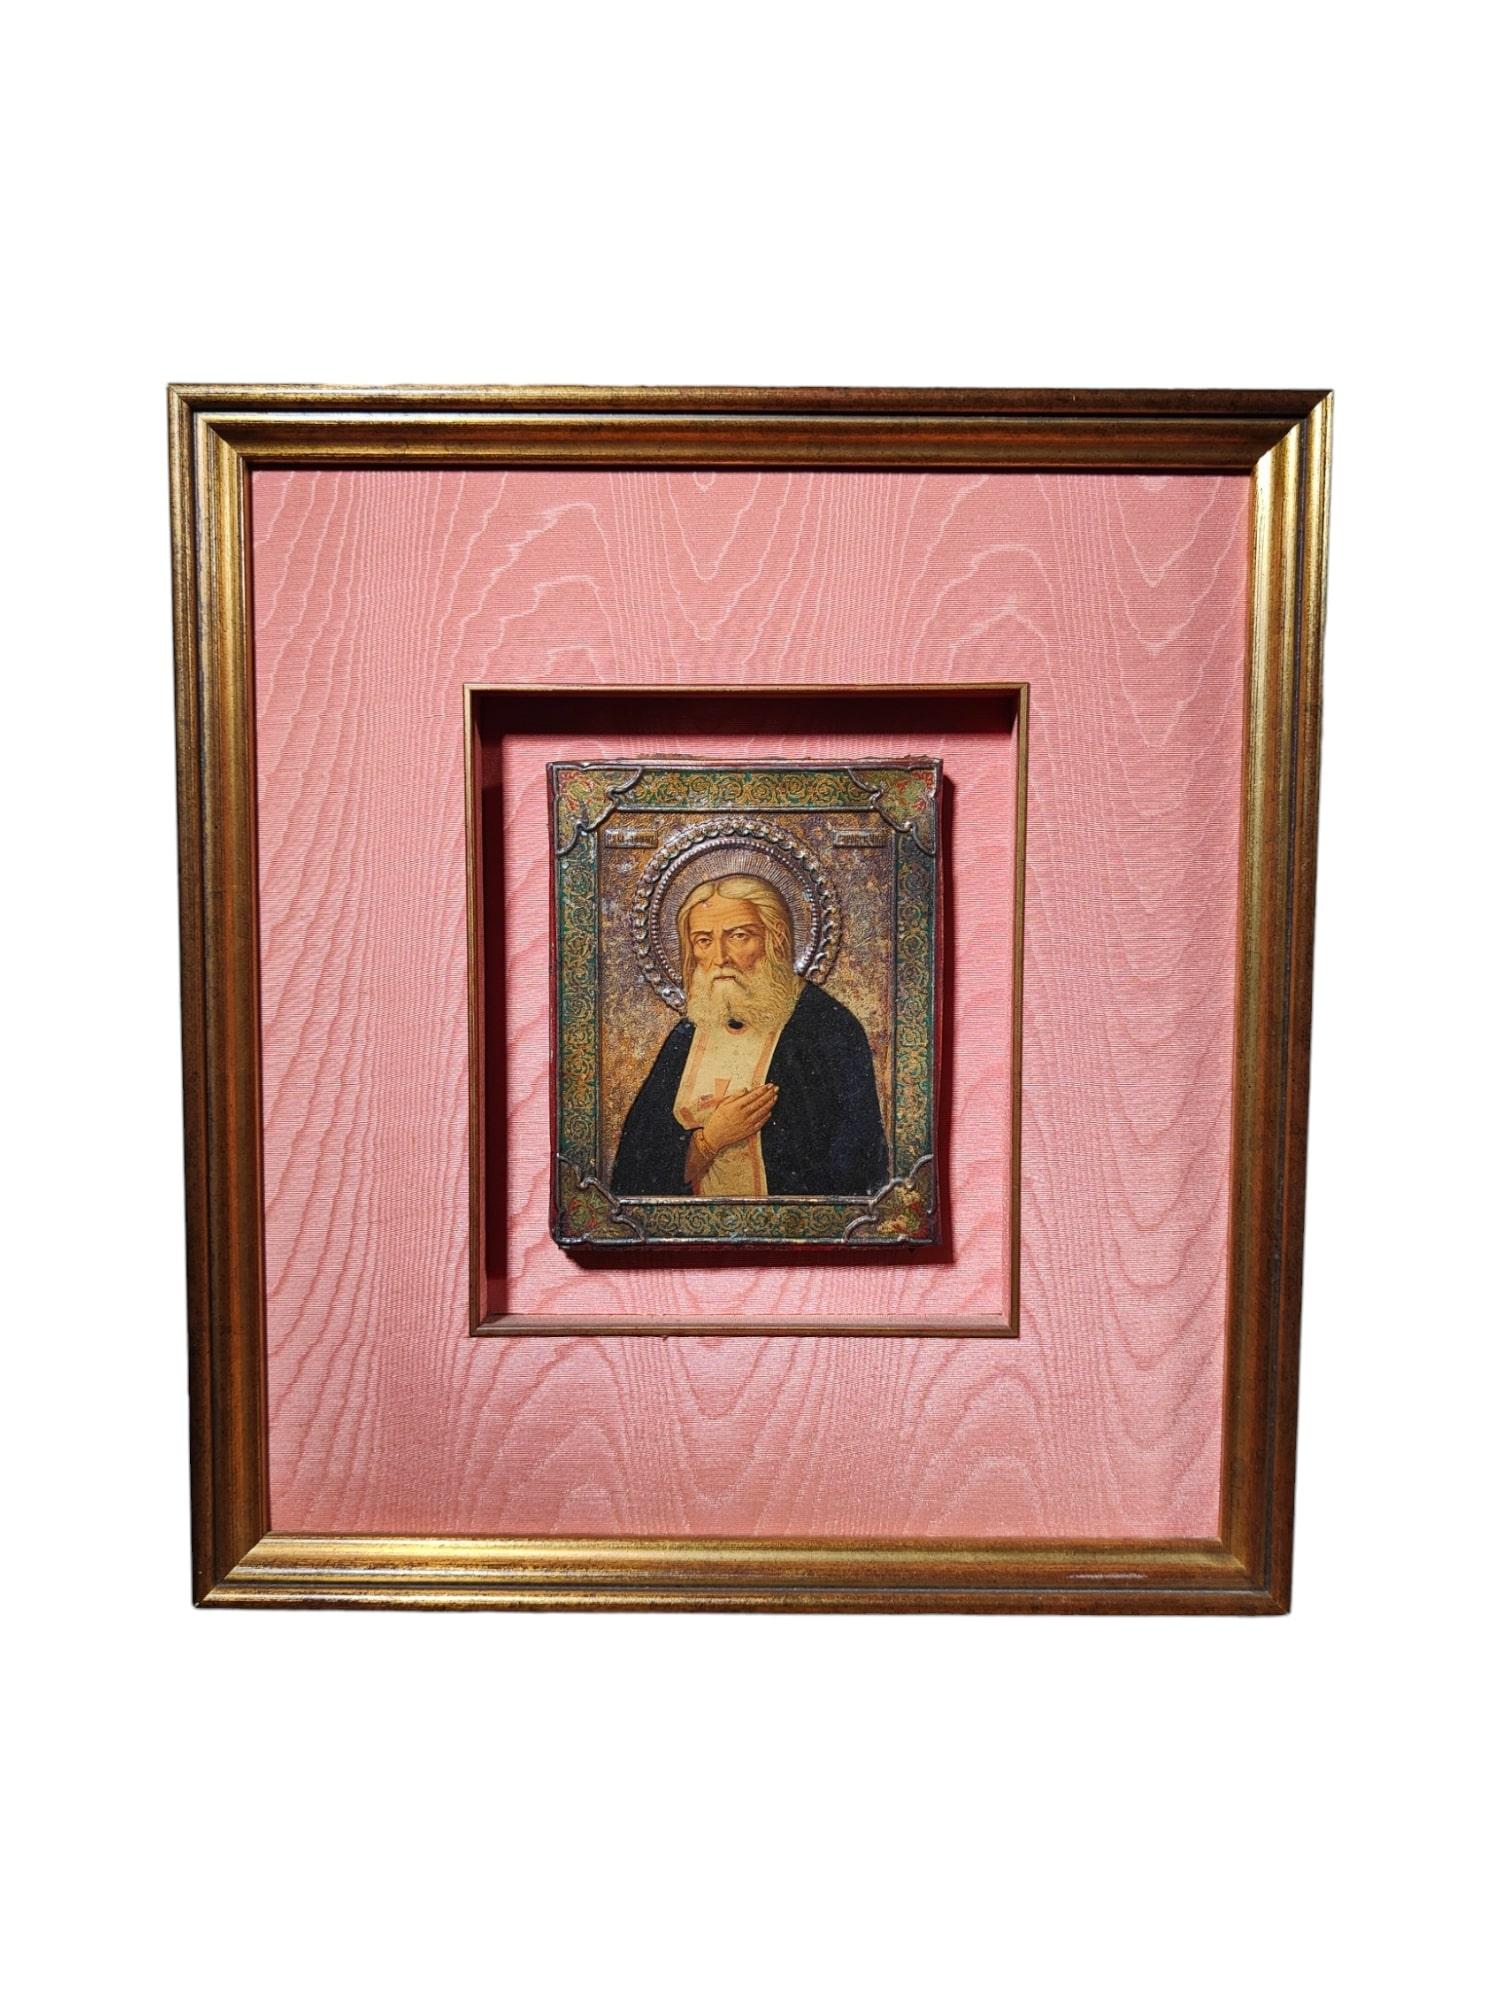 Type: Decorative Russian Icon
Era: 19th Century
Material: Painted on Metal Plate and Framed
Dimensions: 45 x 40 cm (main icon), 18 x 14 cm (smaller icon)
Features and Details:
This decorative Russian icon hails from the 19th century, showcasing